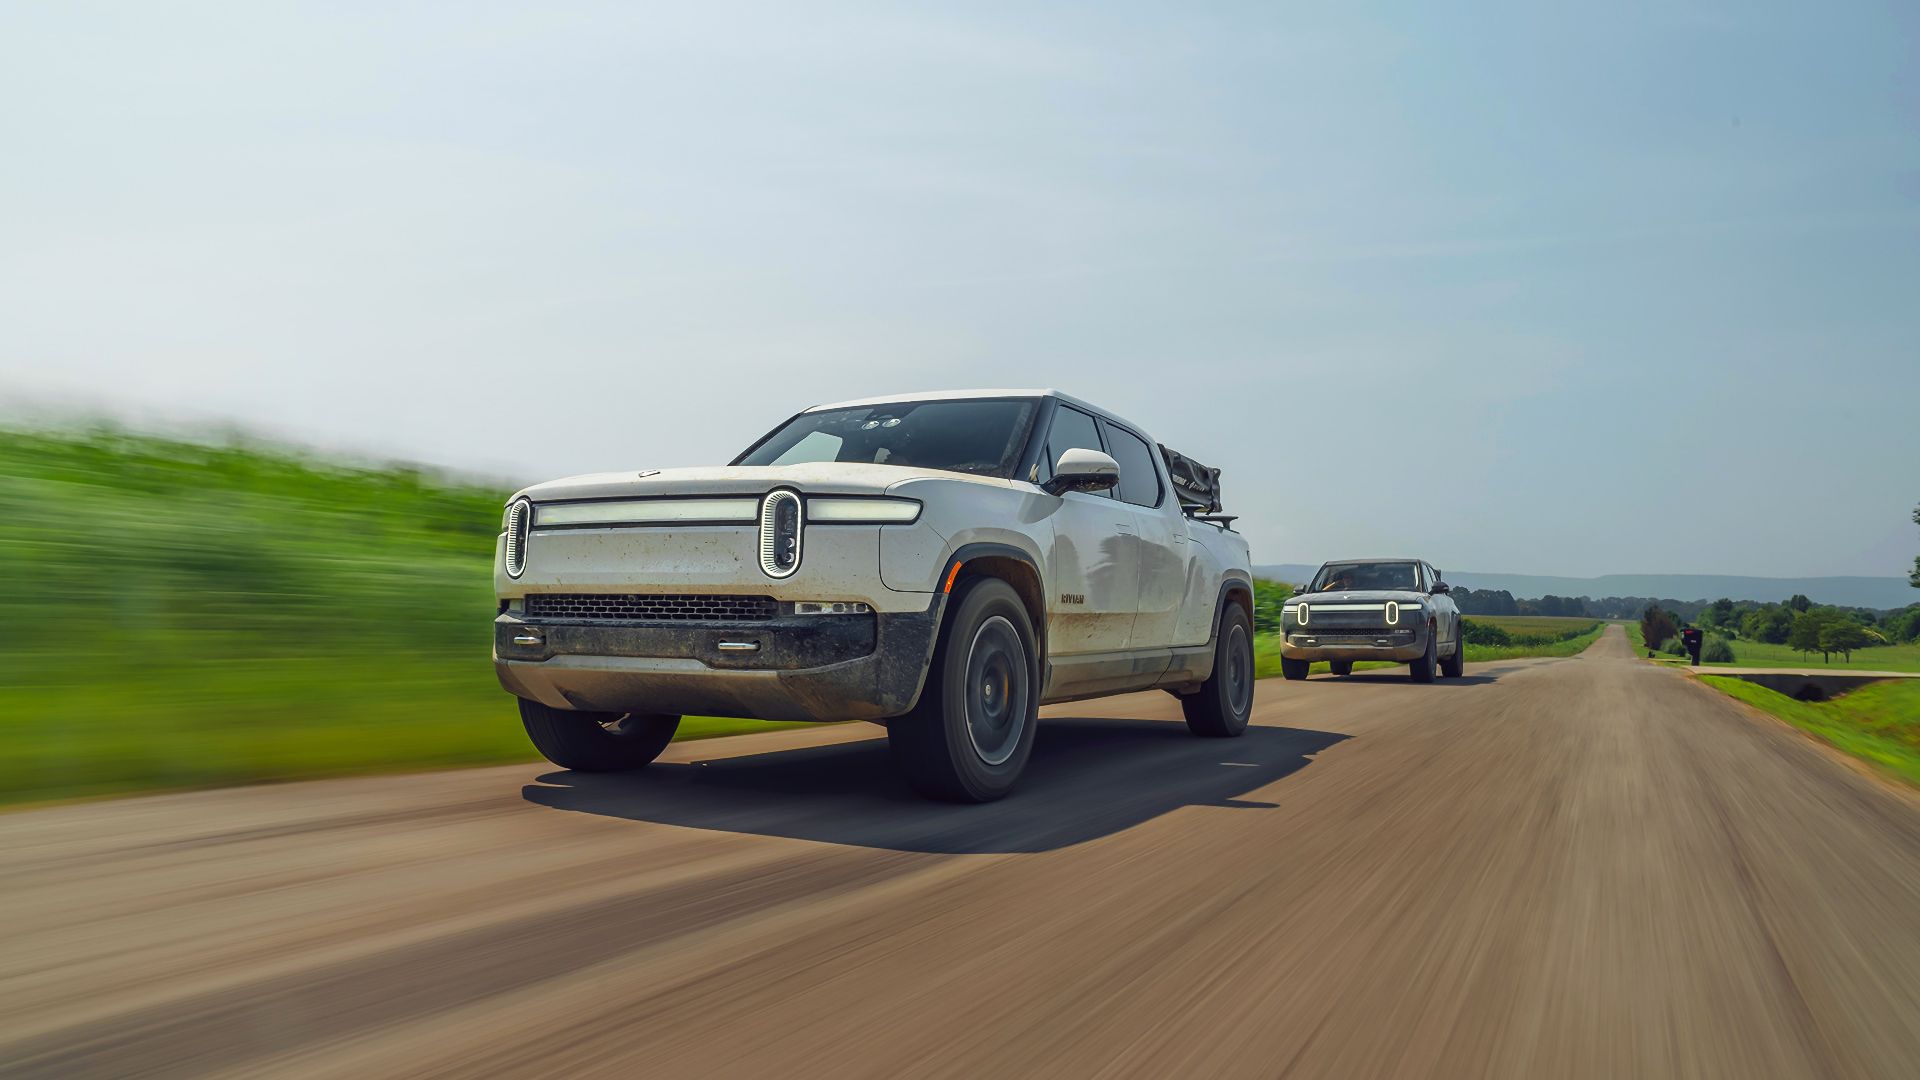 Rivian R1T driving in front of another Rivian EV